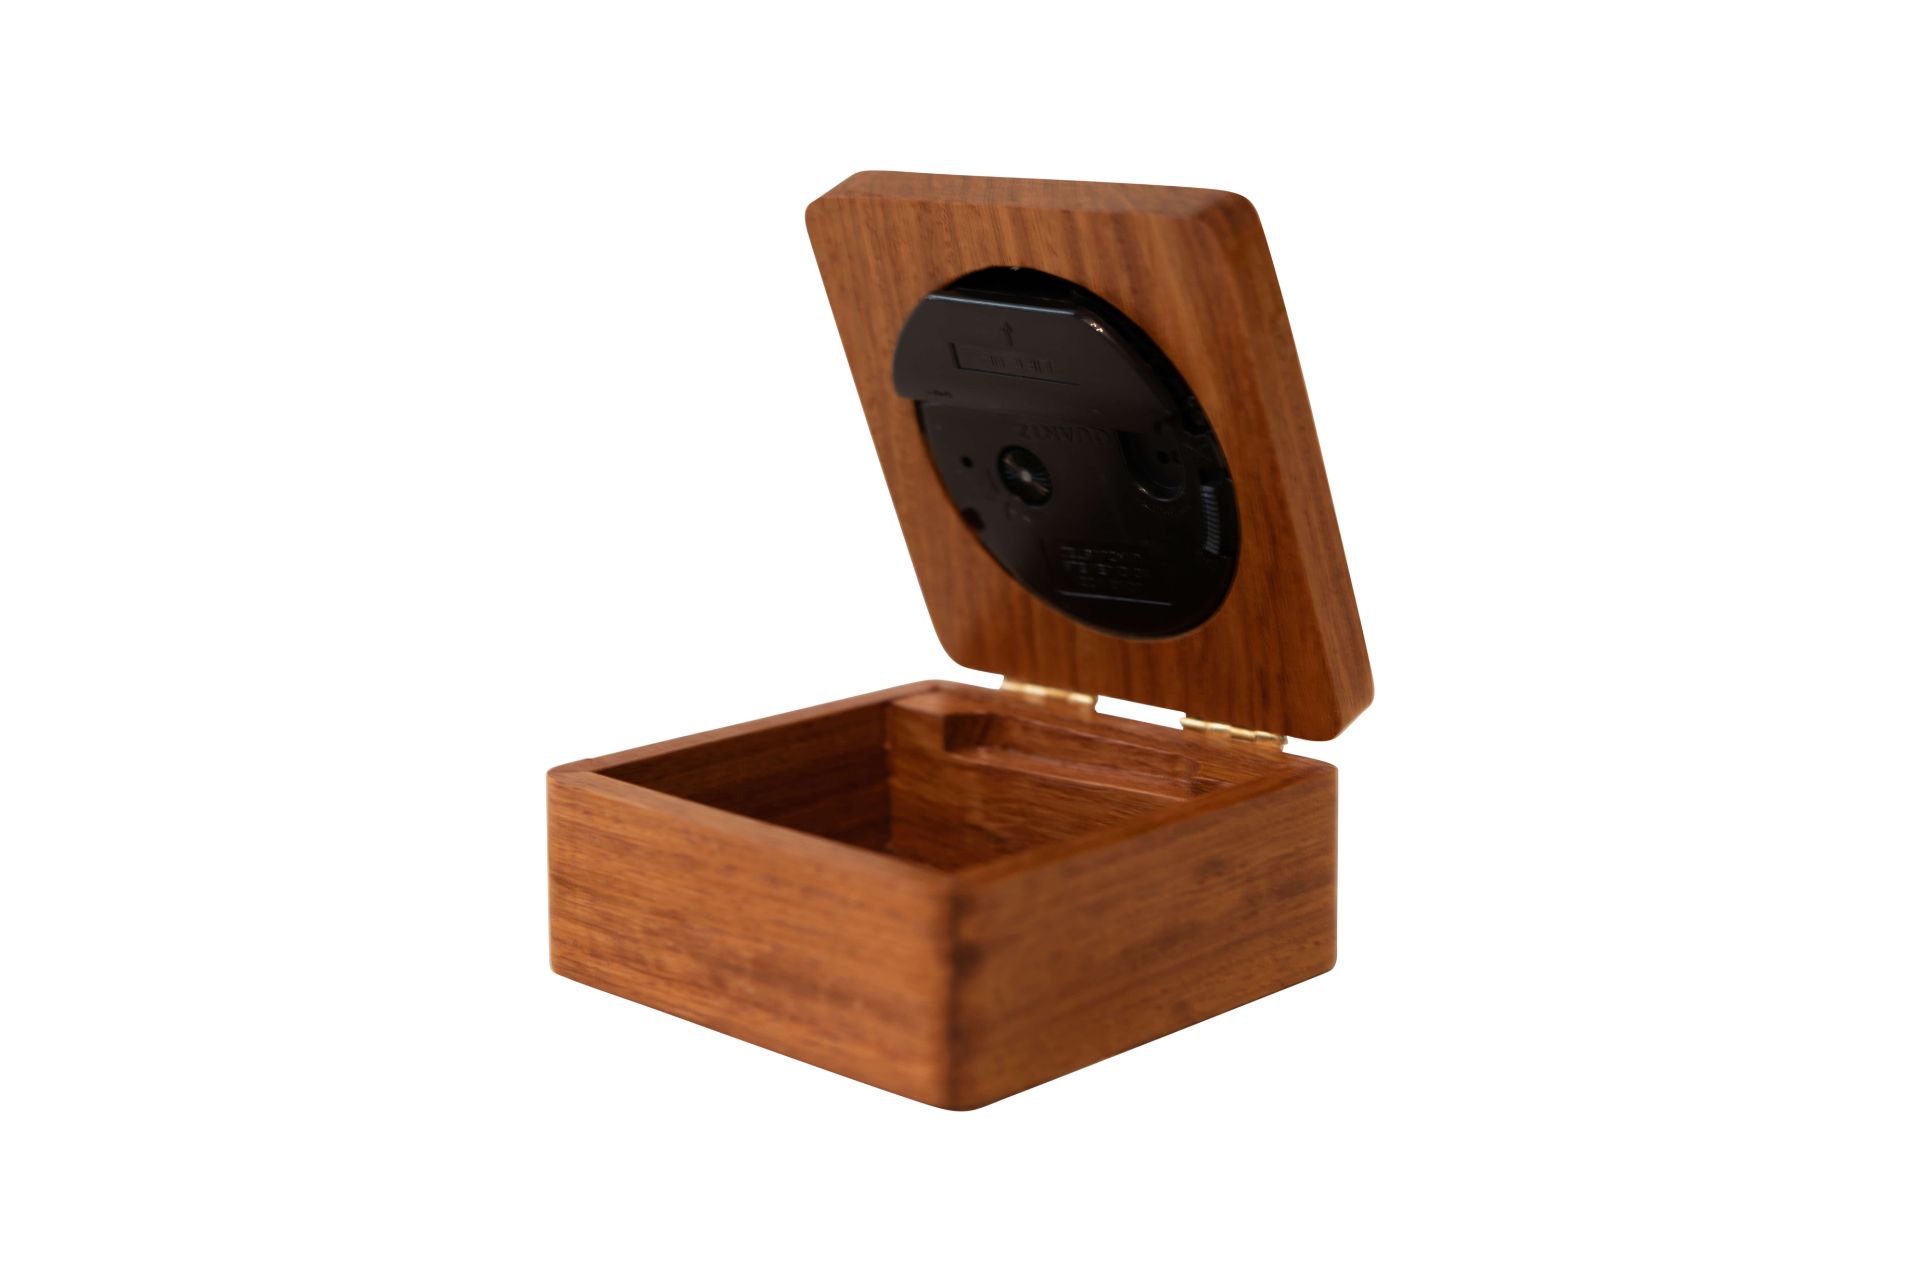 Quarz Uhr in Holz Schatulle ohne Batterie | Quartz Clock in Wooden Box, without Battery - Image 3 of 5